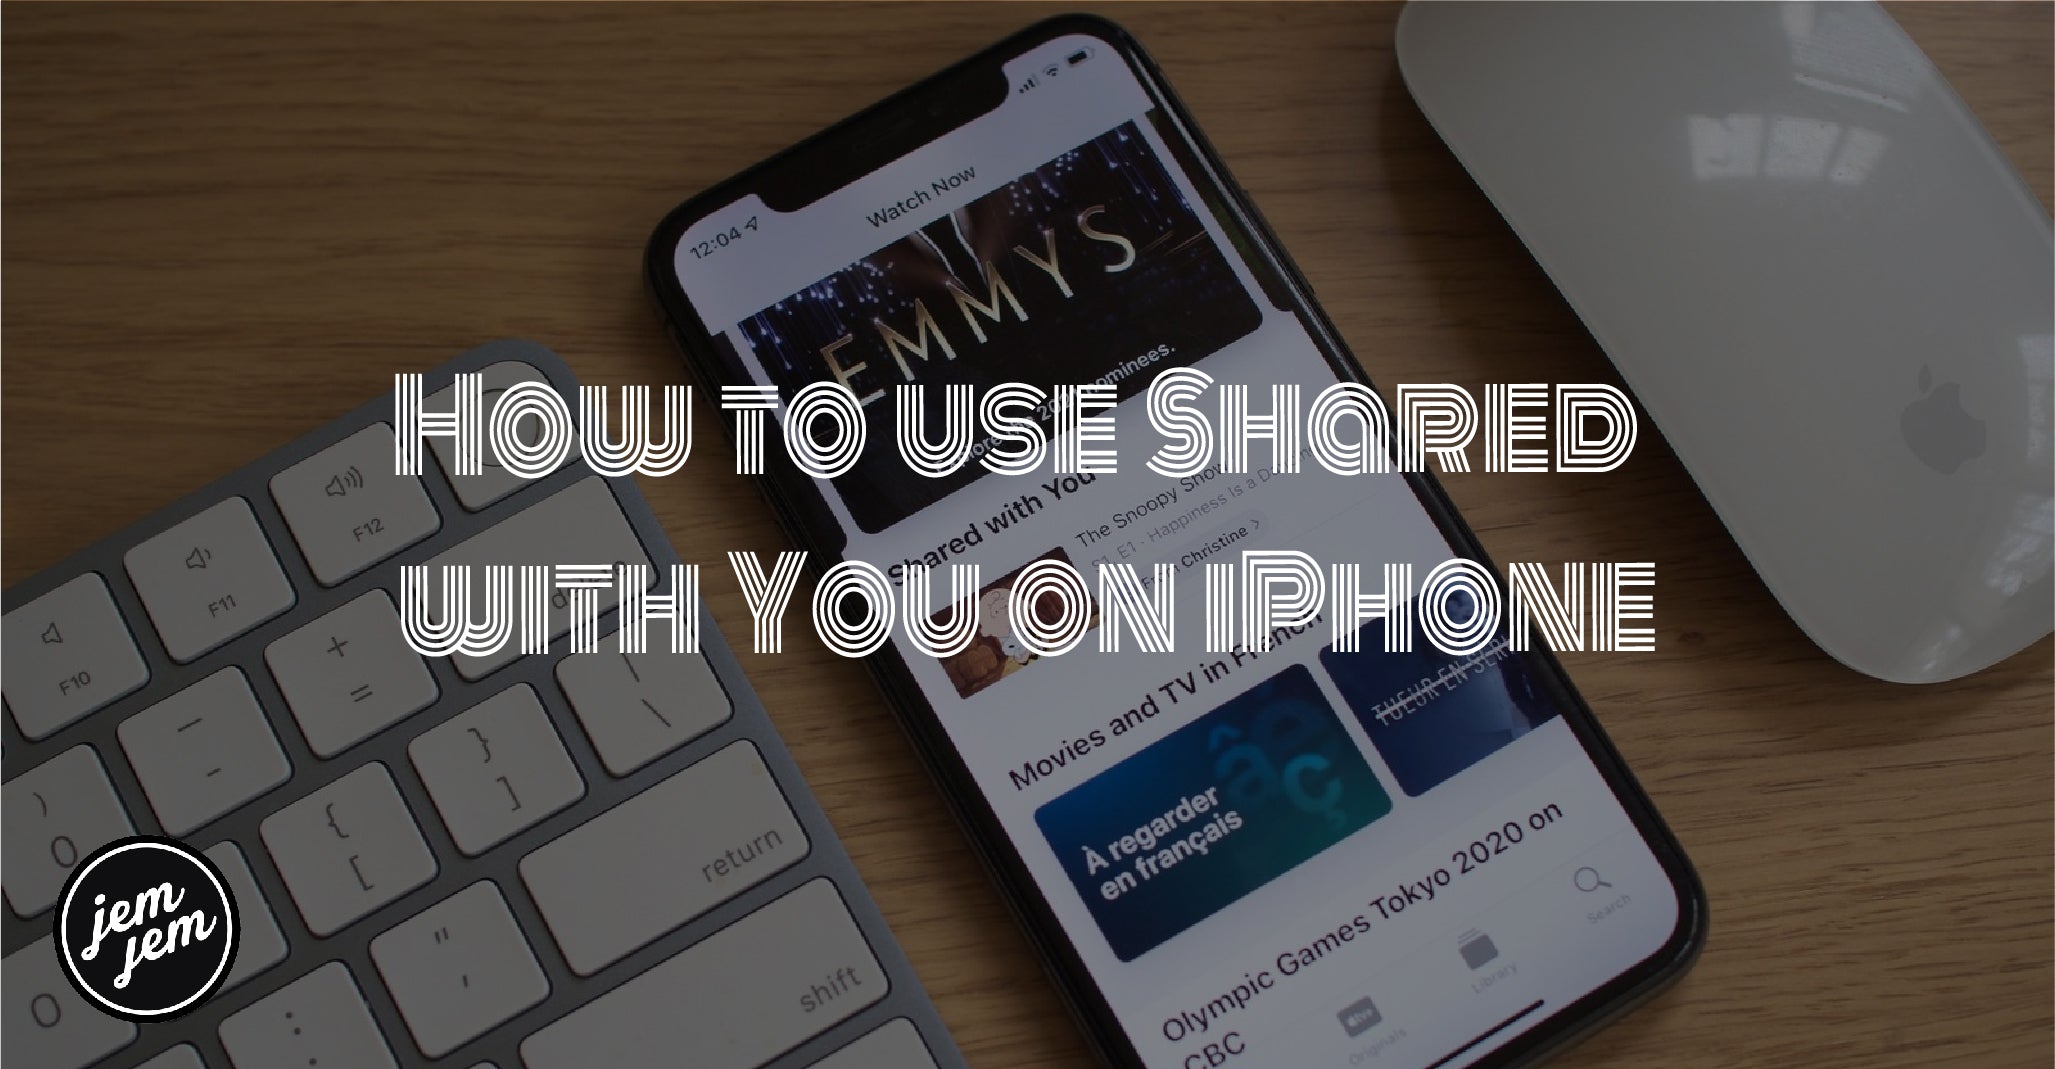 How to use Shared with You on iPhone